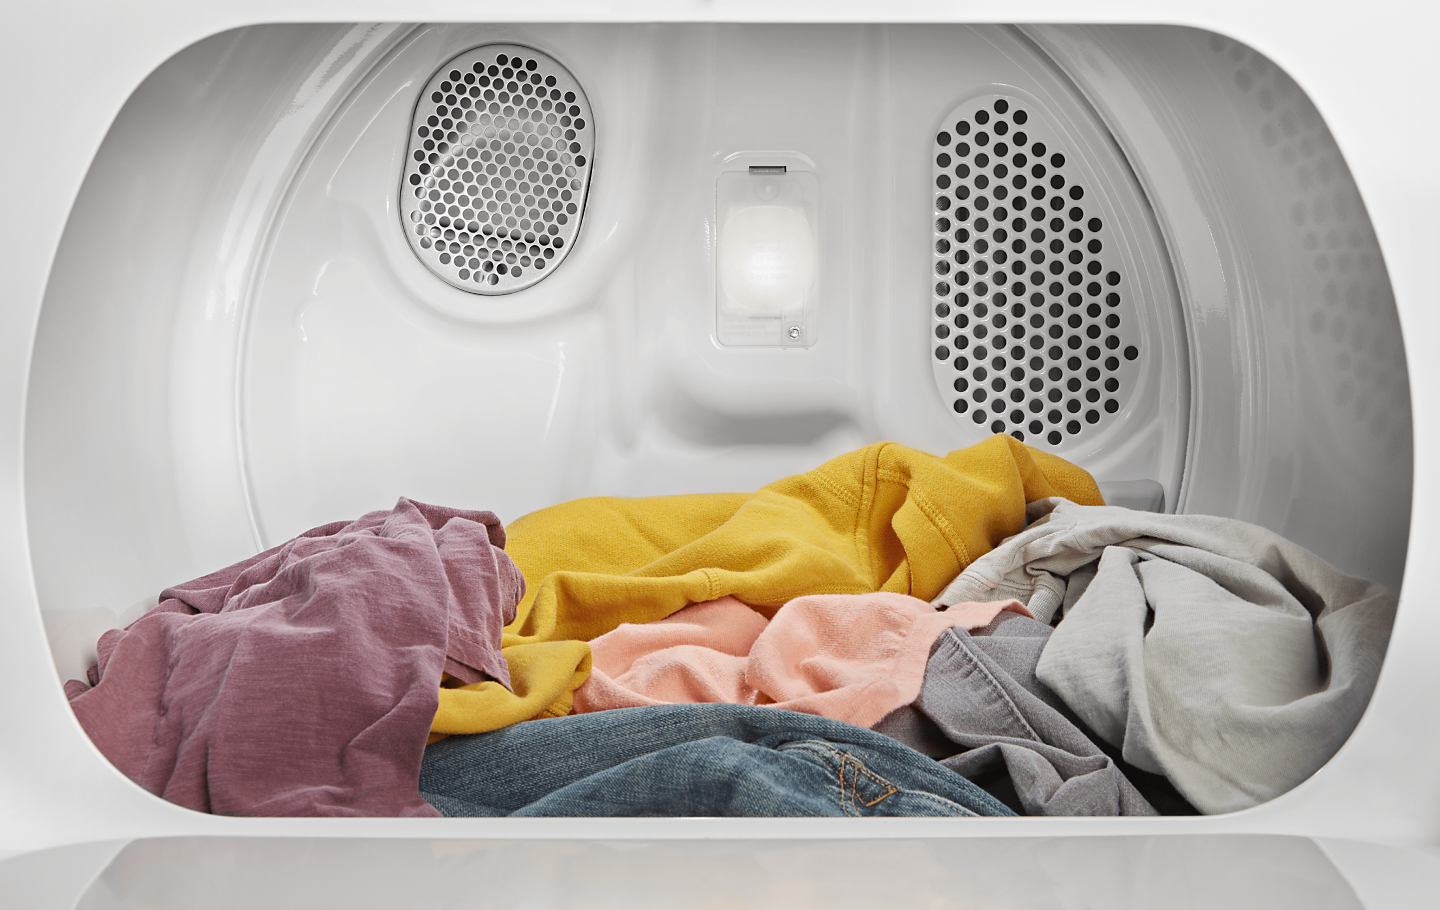 How To Fix A Dryer Not Heating Dryer Not Heating: Troubleshooting Guide | Whirlpool